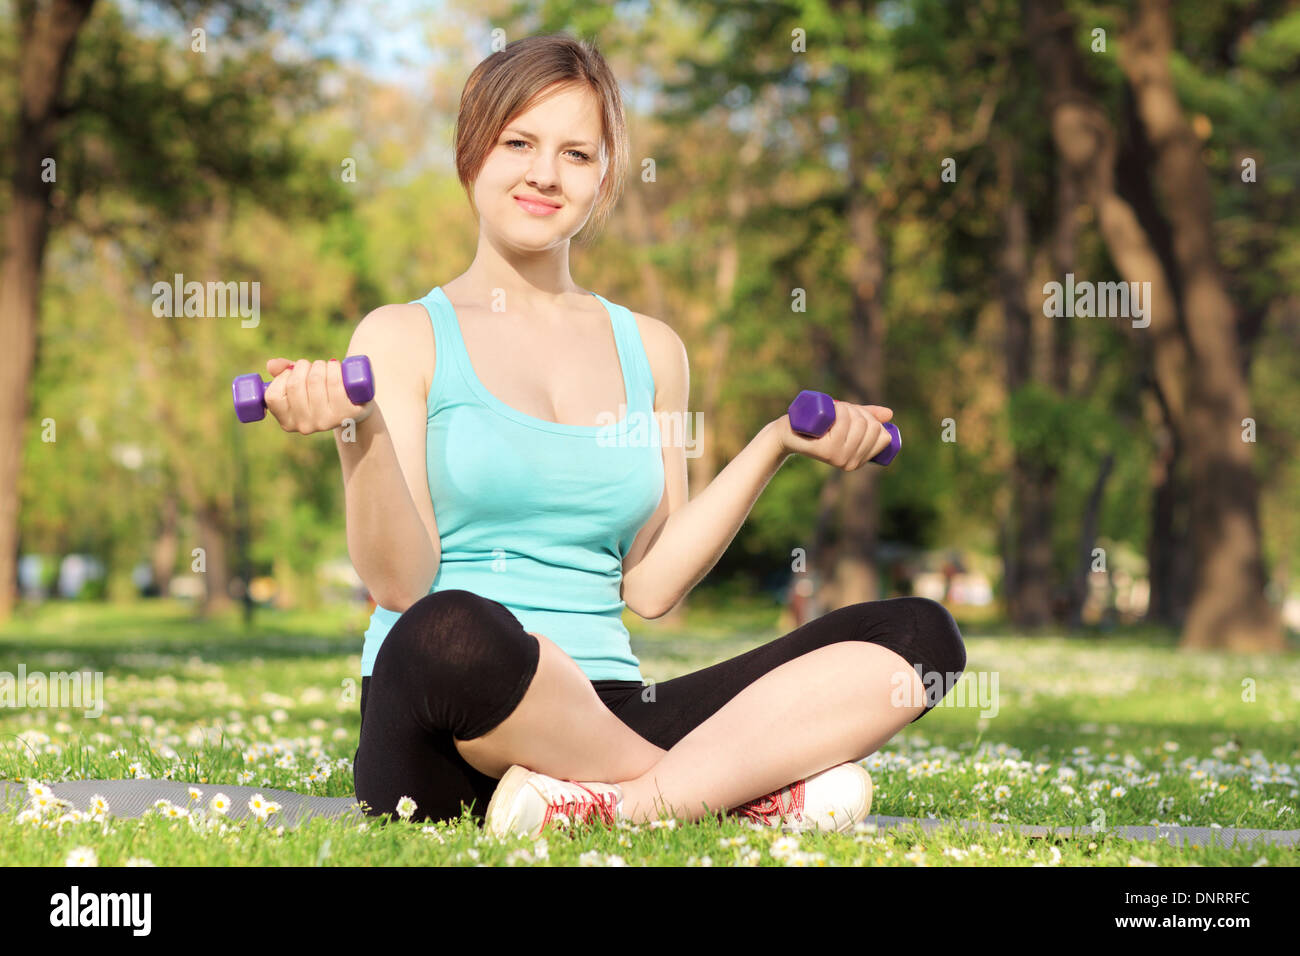 Female athlete exercising with dumbbells in a park Stock Photo